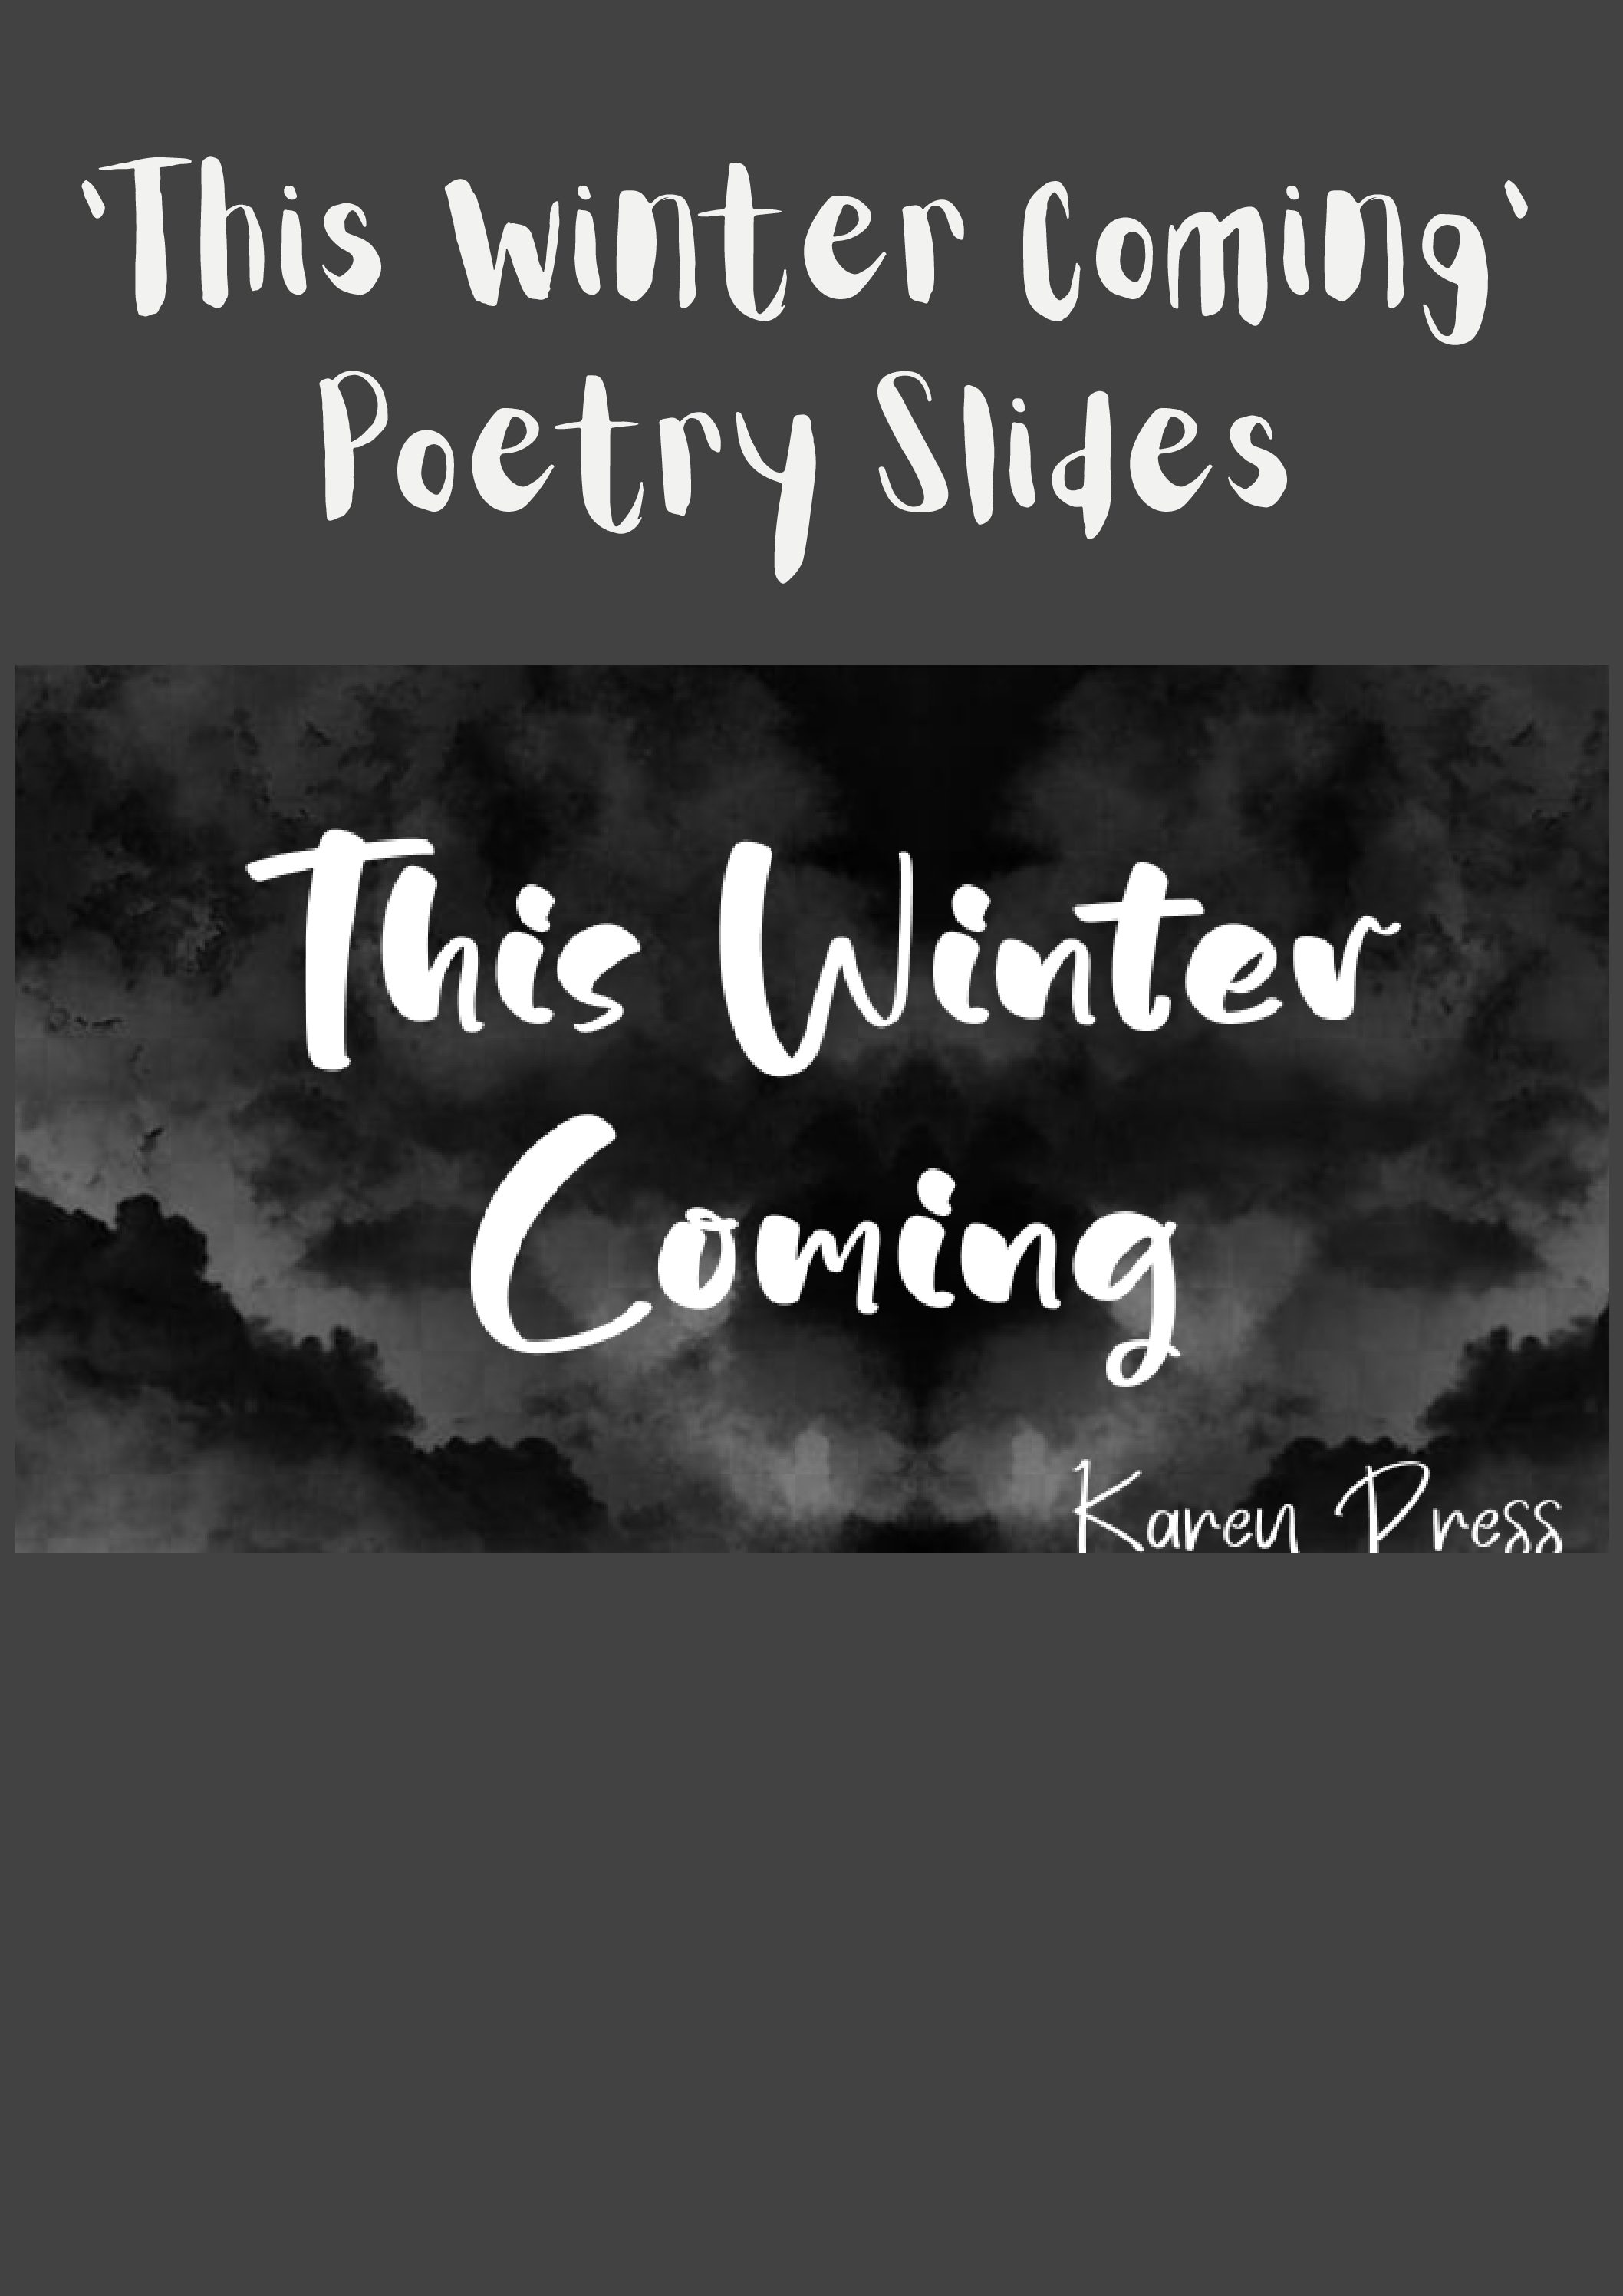 this winter coming poetry essay pdf download